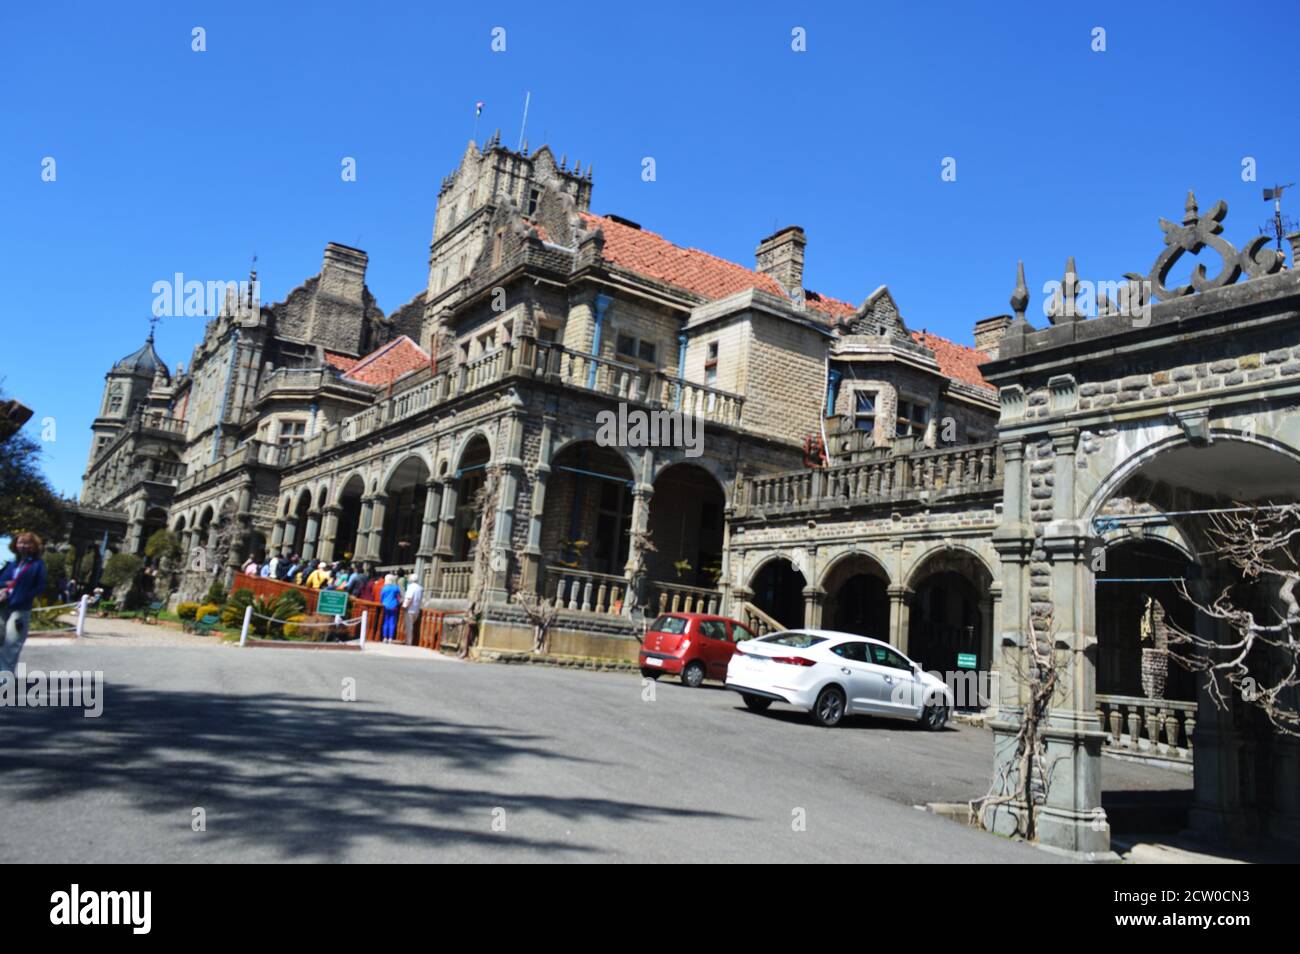 The Institute of Advance Studies in Shimla, also known as Viceregal Lodge, house of Lord Dufferin built in Indo – Gothic style architecture, selective Stock Photo